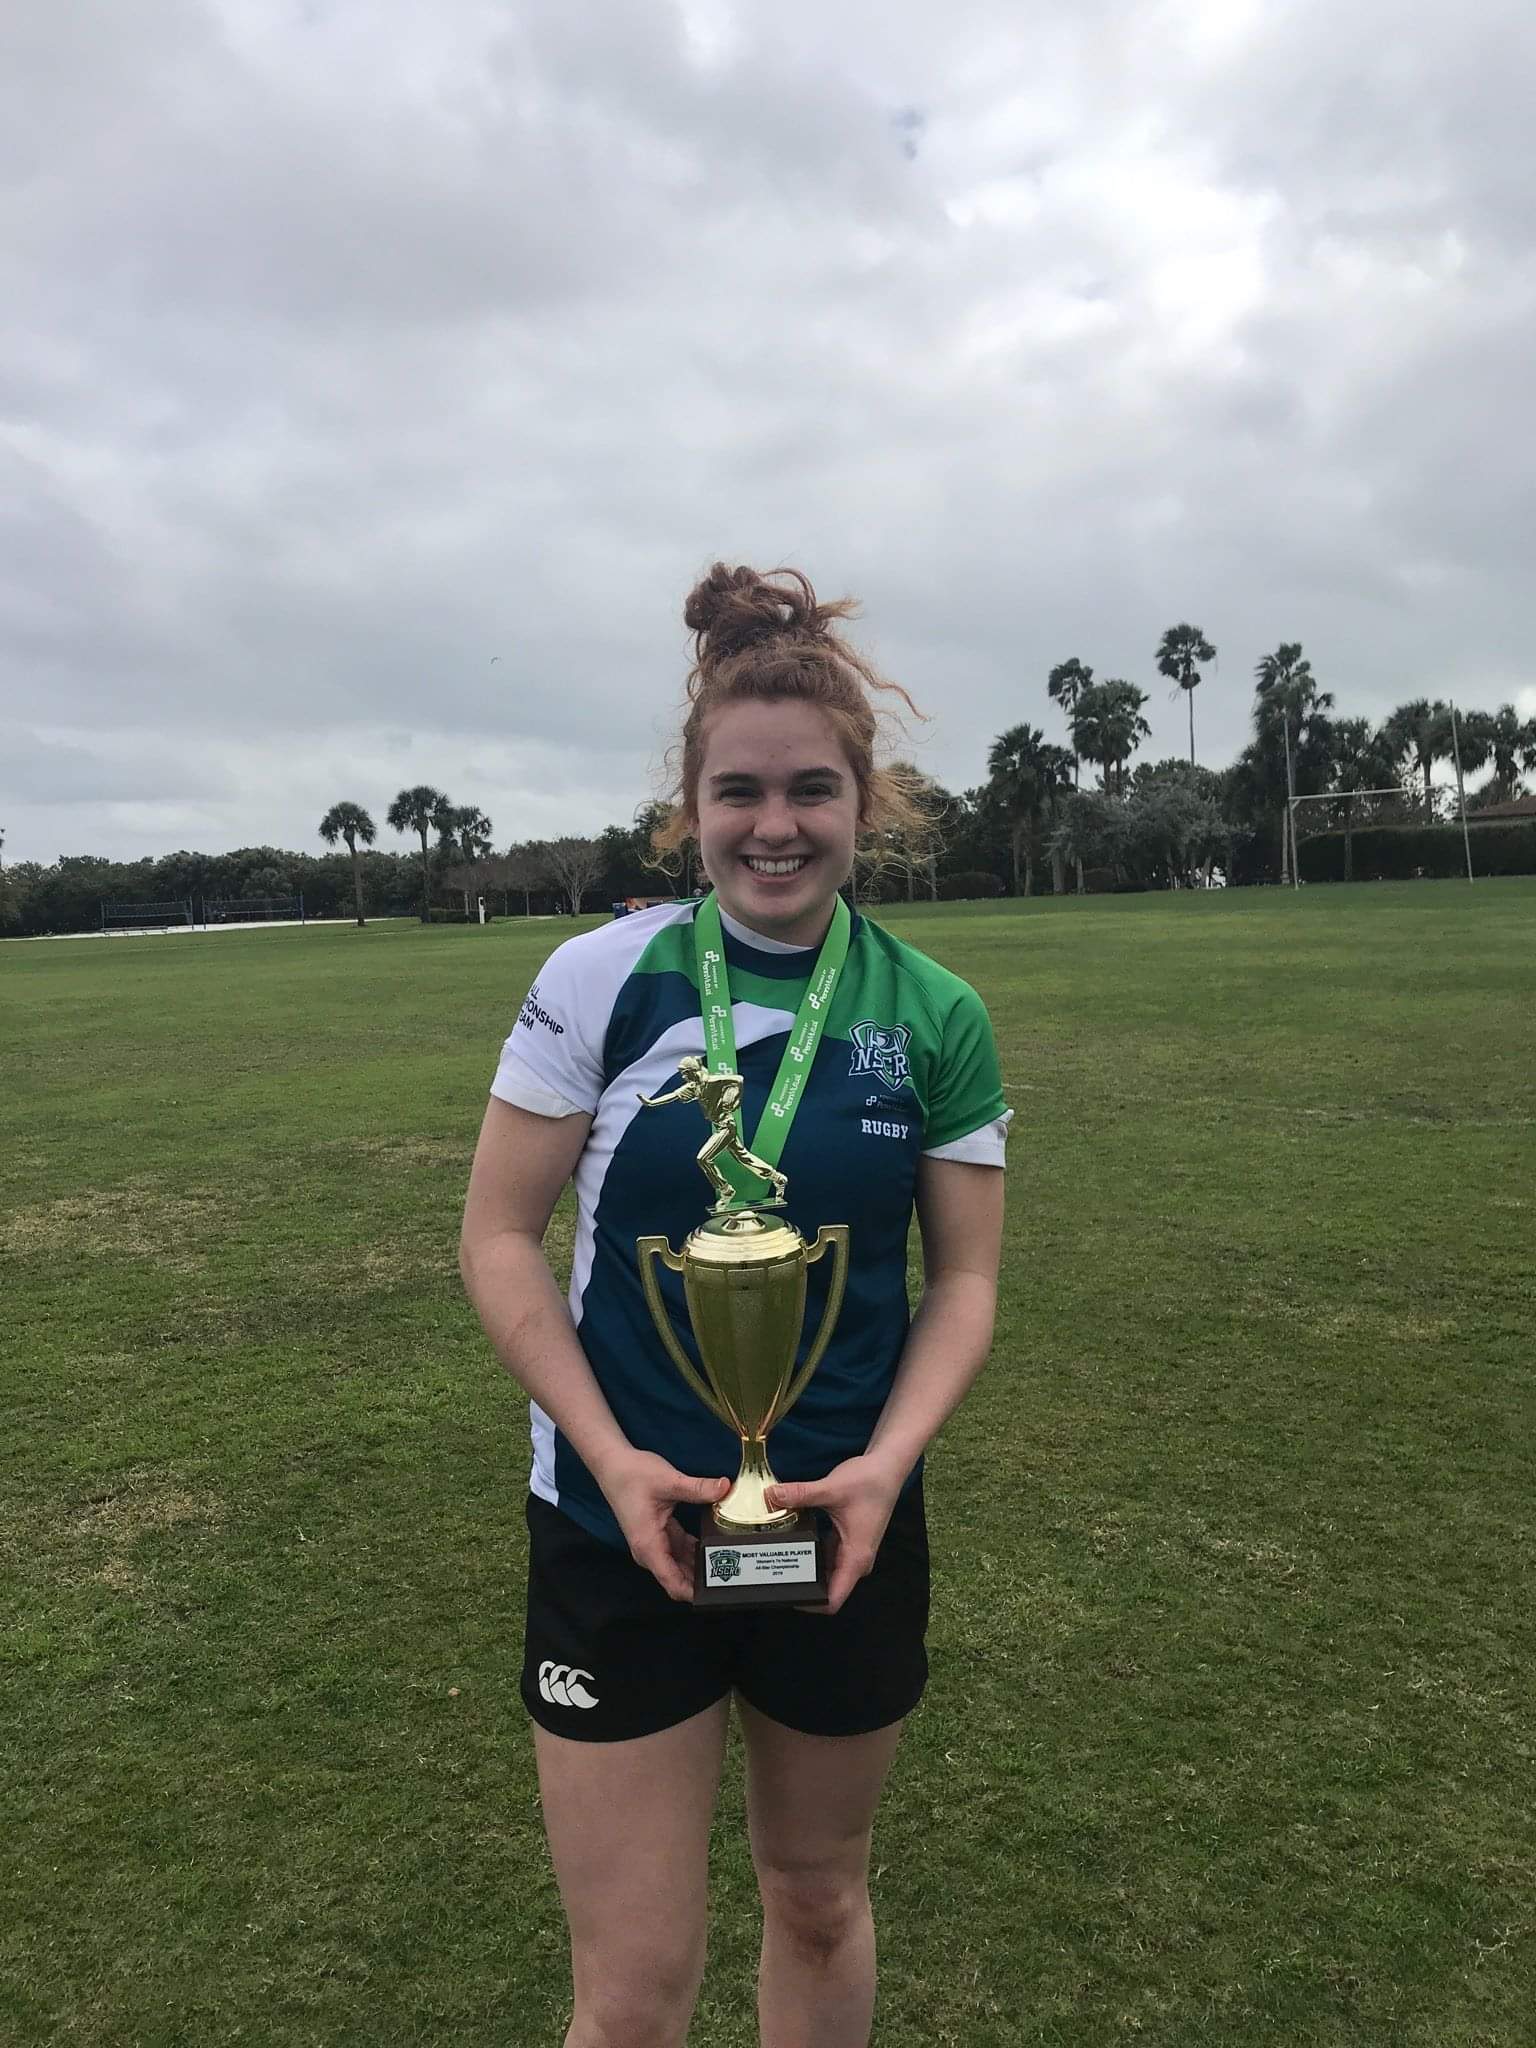 USD freshman awarded MVP at National Rugby All-Star Tournament